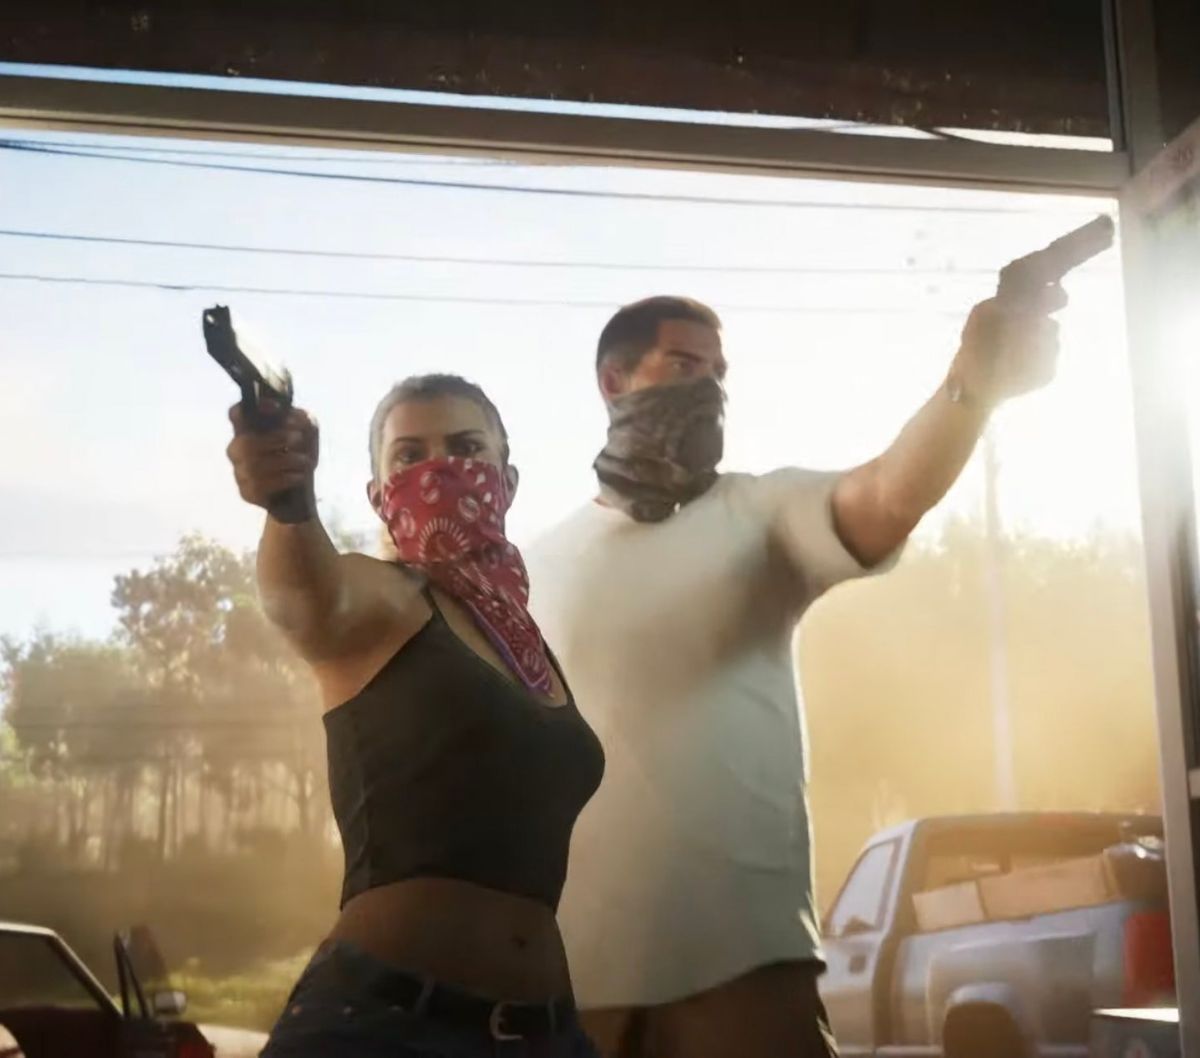 GTA 6 Trailer Shows The First Female Protagonist!  trstdly trusted